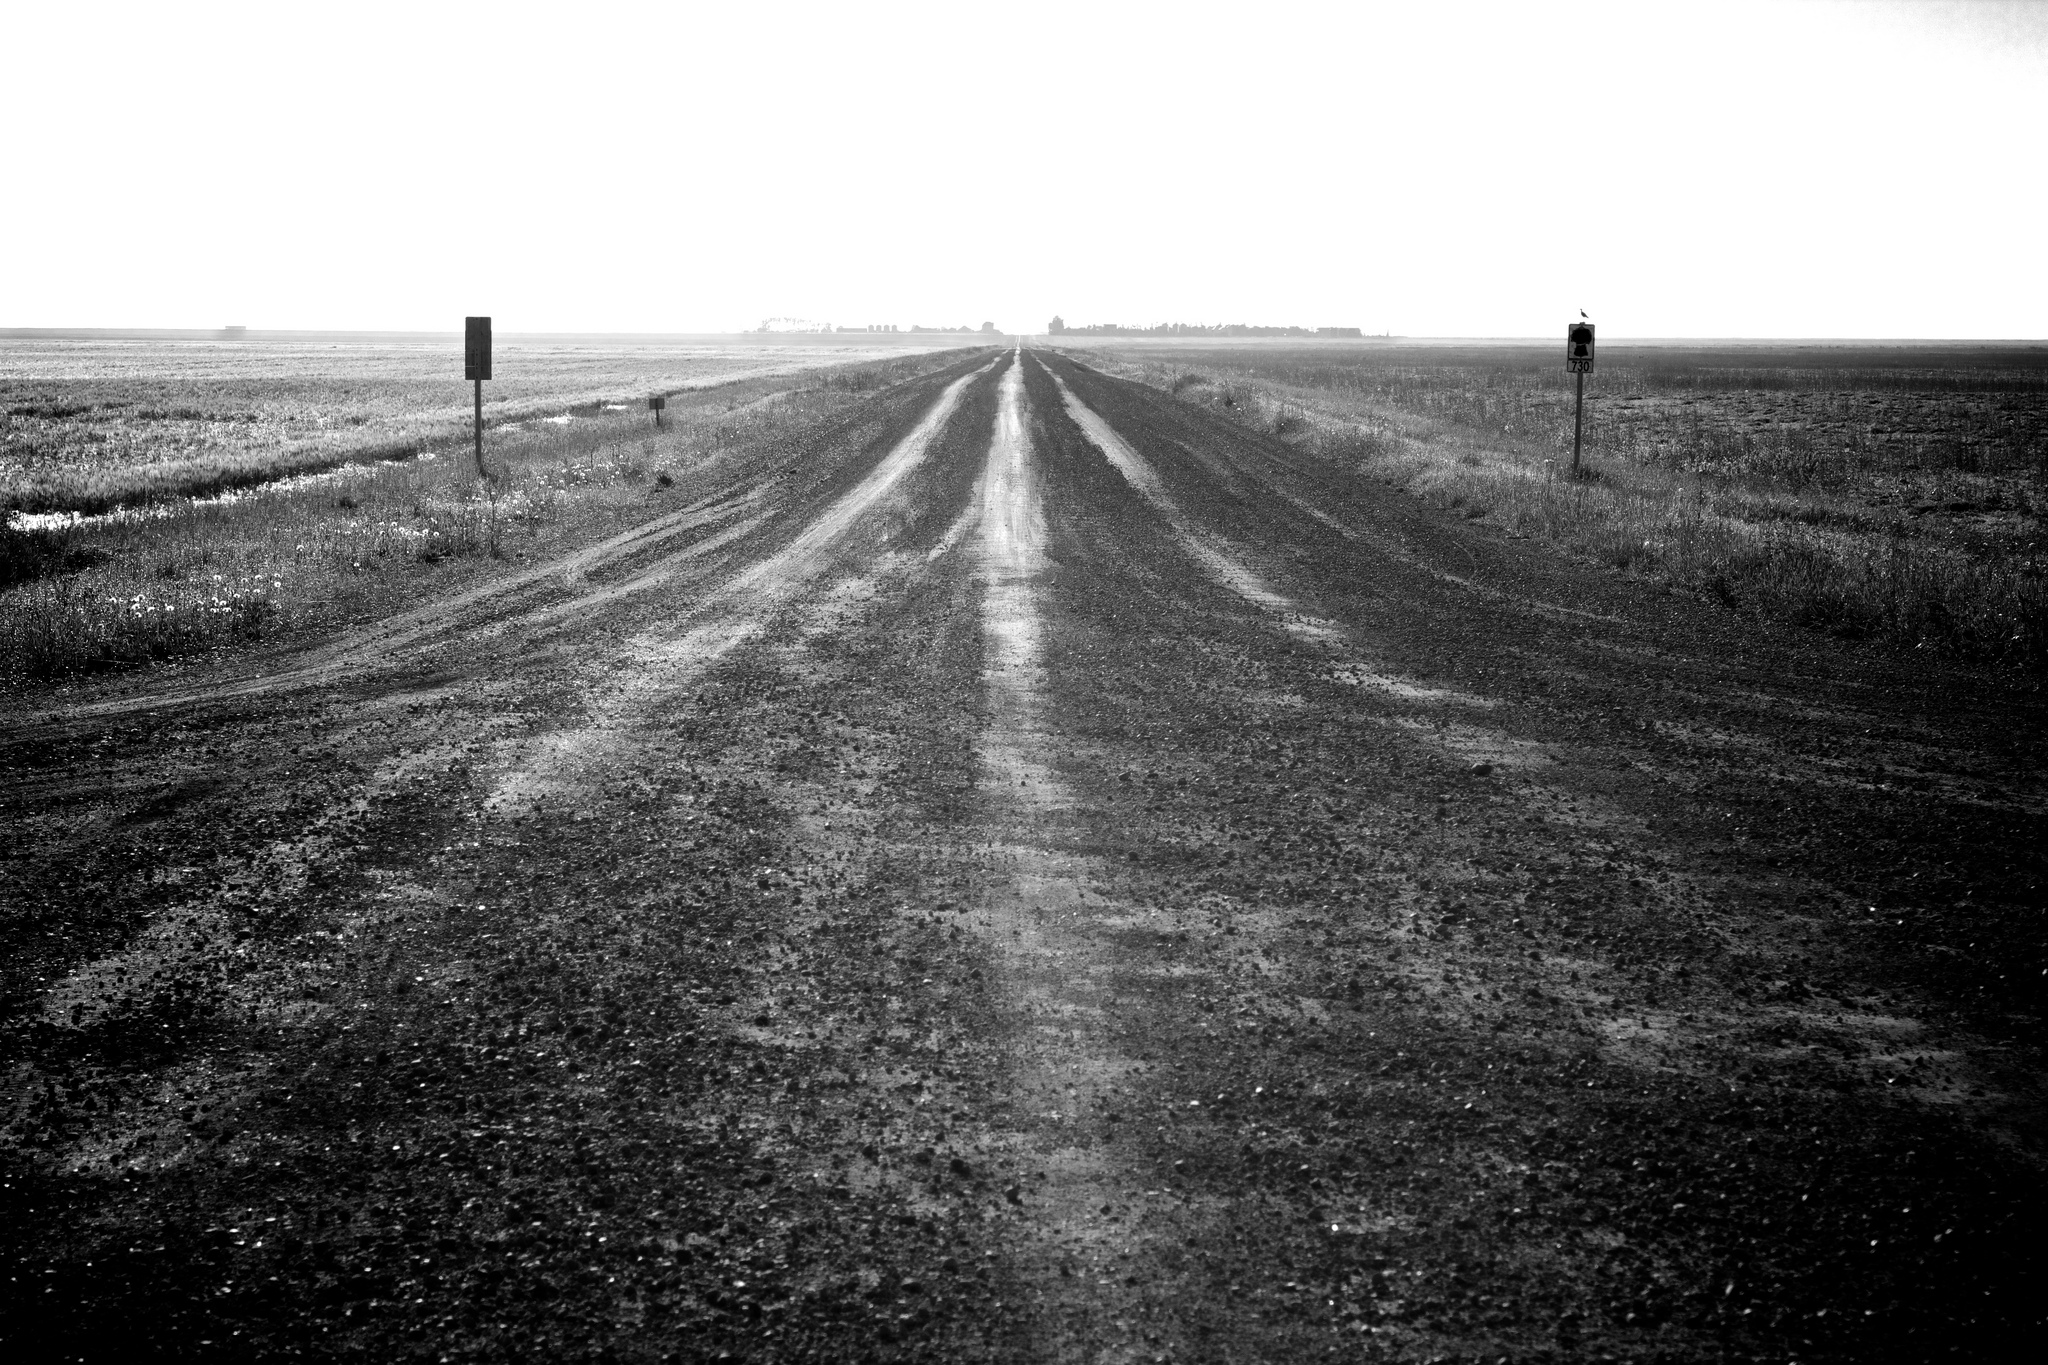 A black and white photo of a road crossing, with dirty roads in all directions. We se a city far off in the distance.